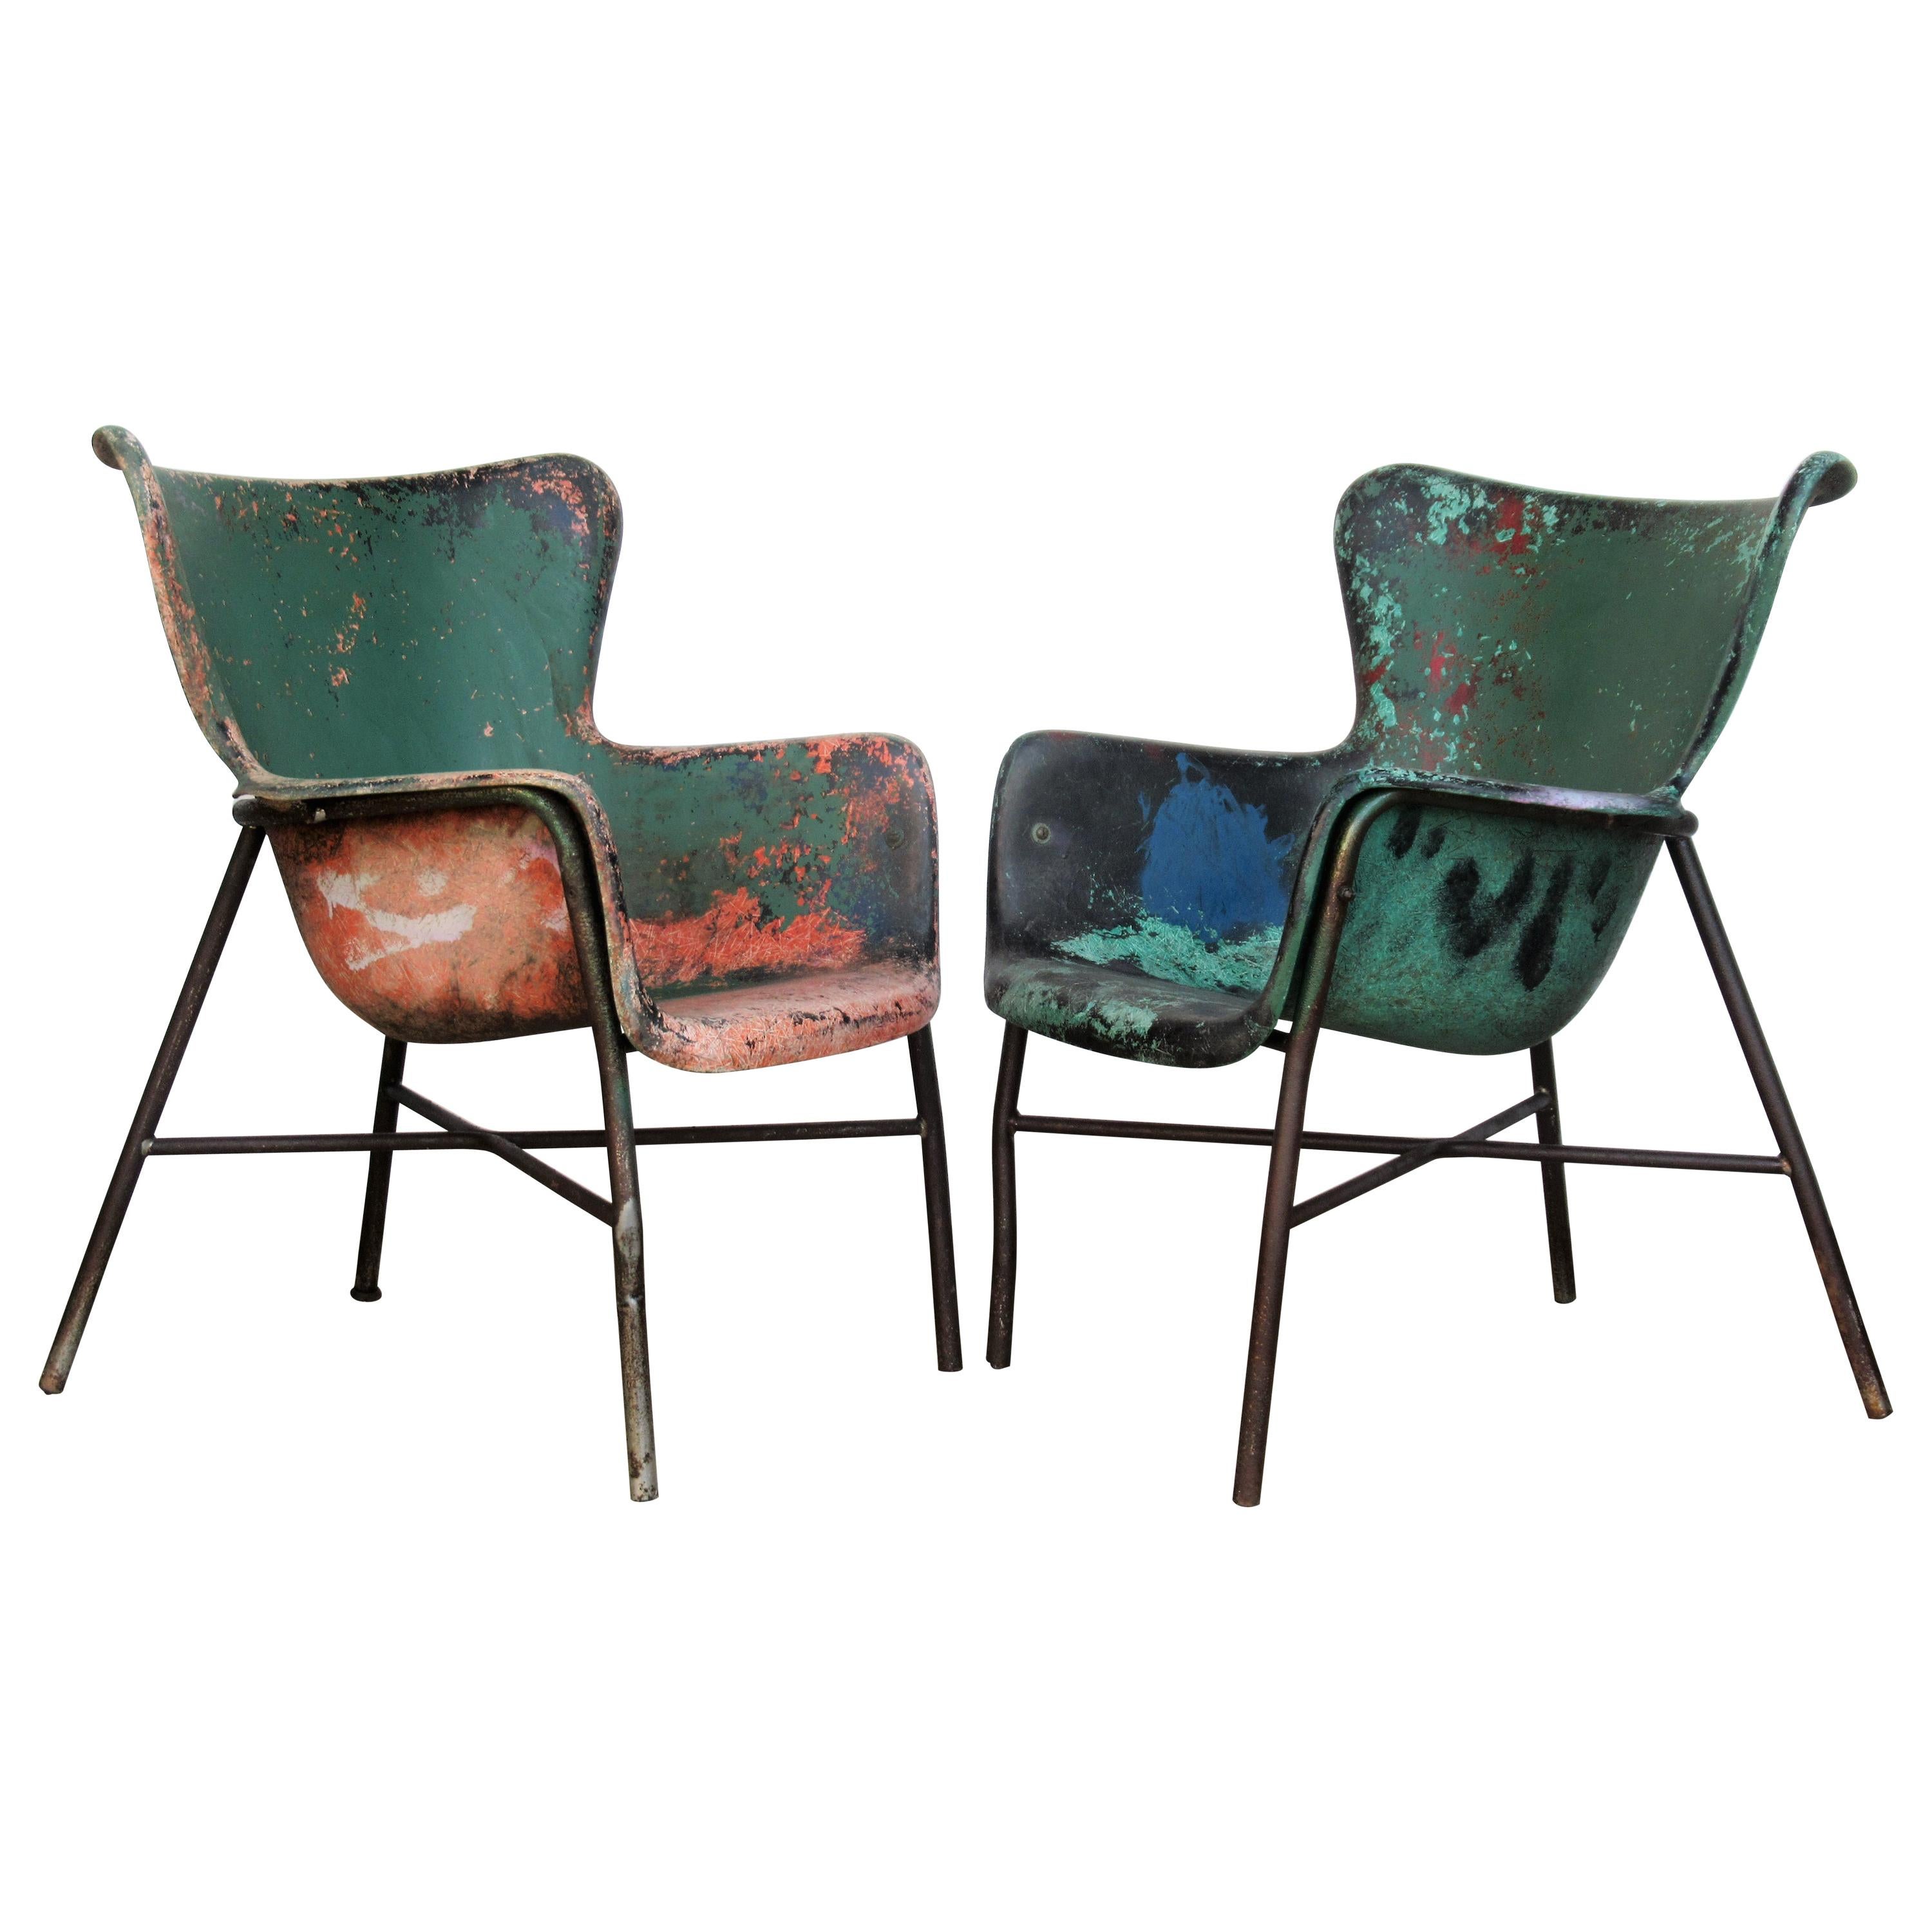 Lawrence Peabody Fiberglass Wing Chairs in Brilliant Worn Old Painted Surface